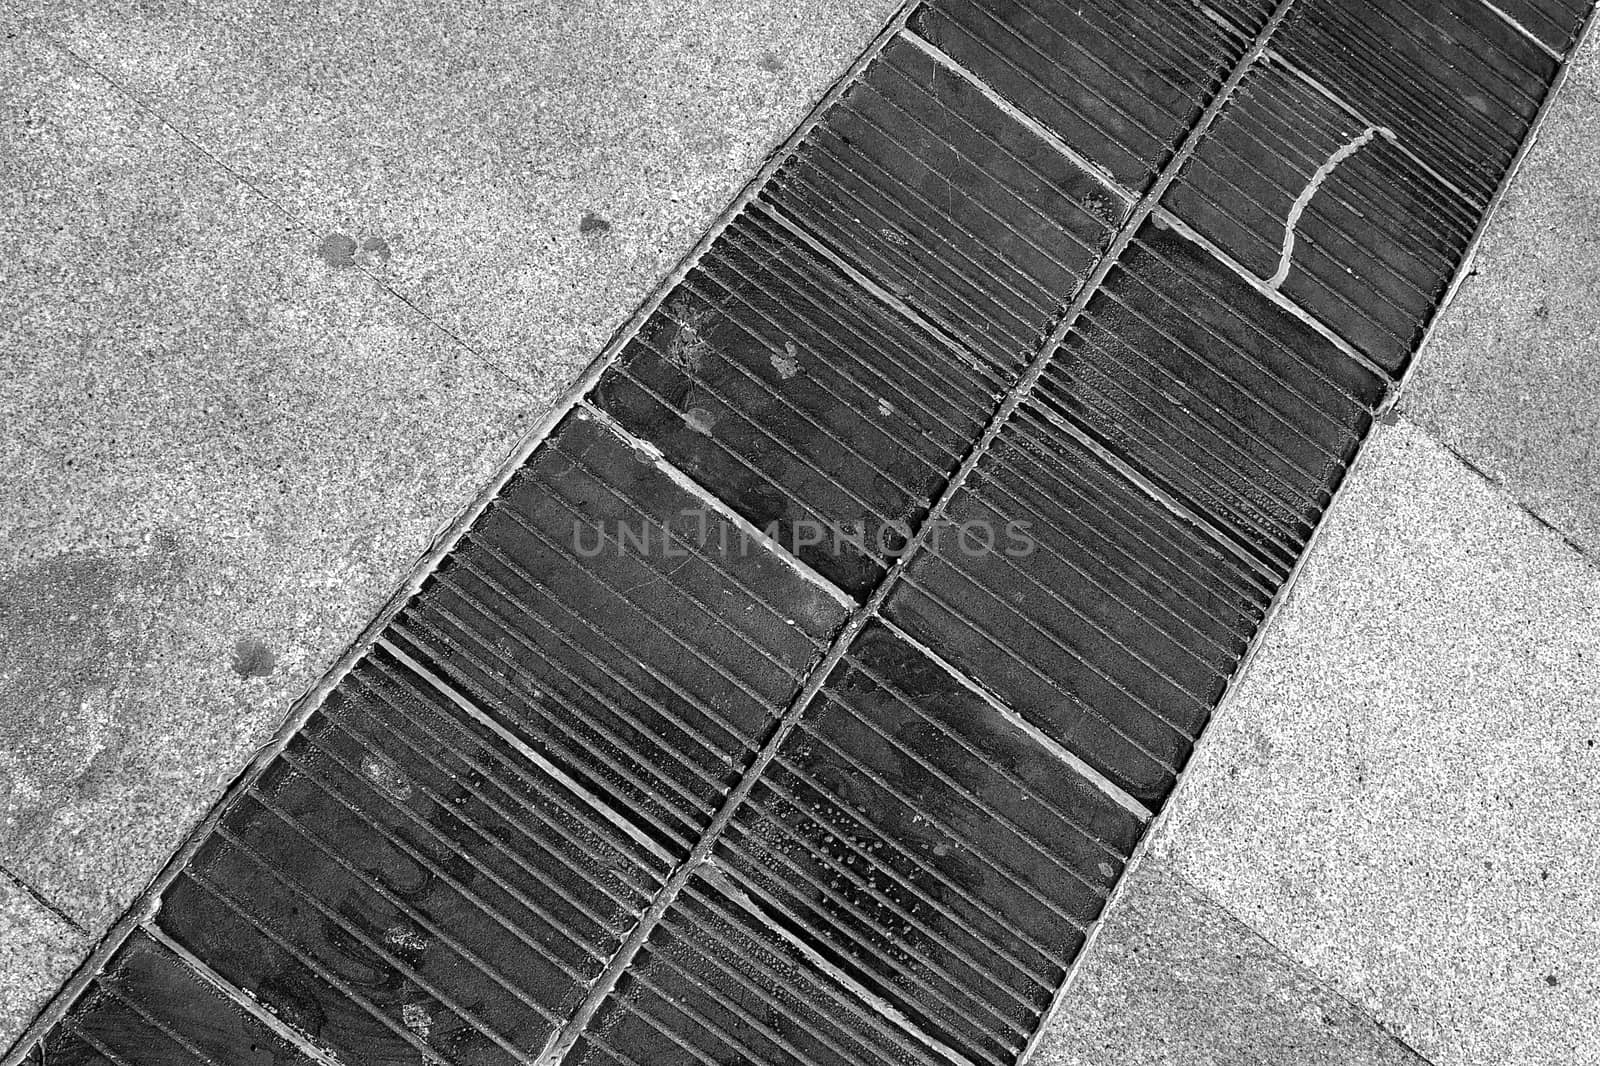 Flagstones in simple pattern by Roger0047